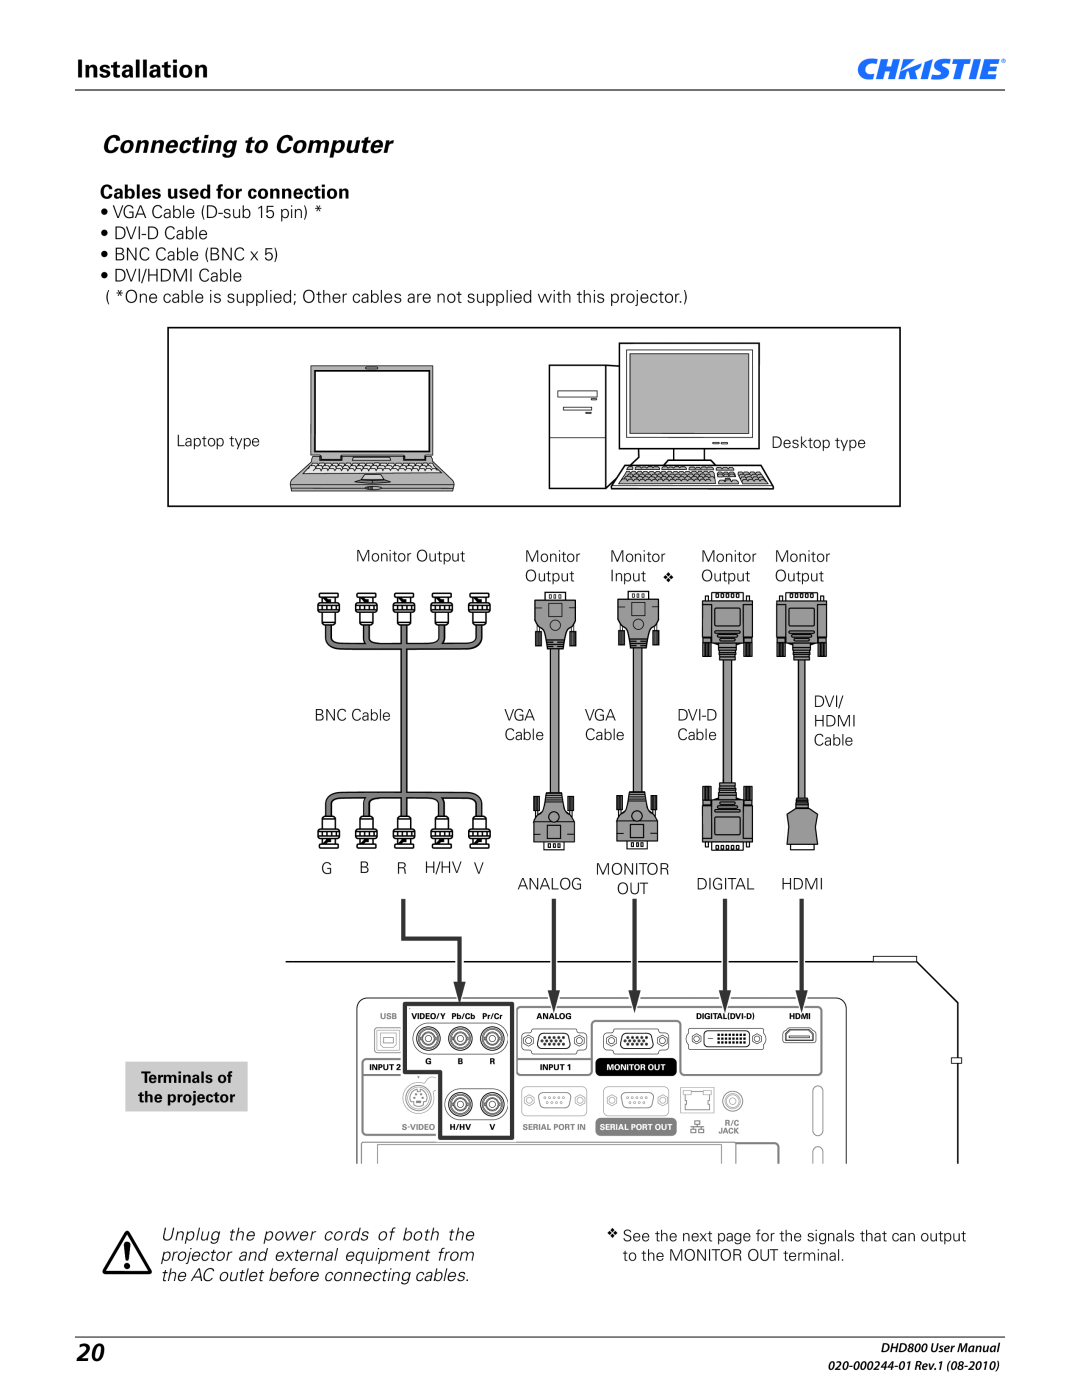 Christie Digital Systems DHD800 user manual Connecting to Computer, Installation, Cables used for connection 